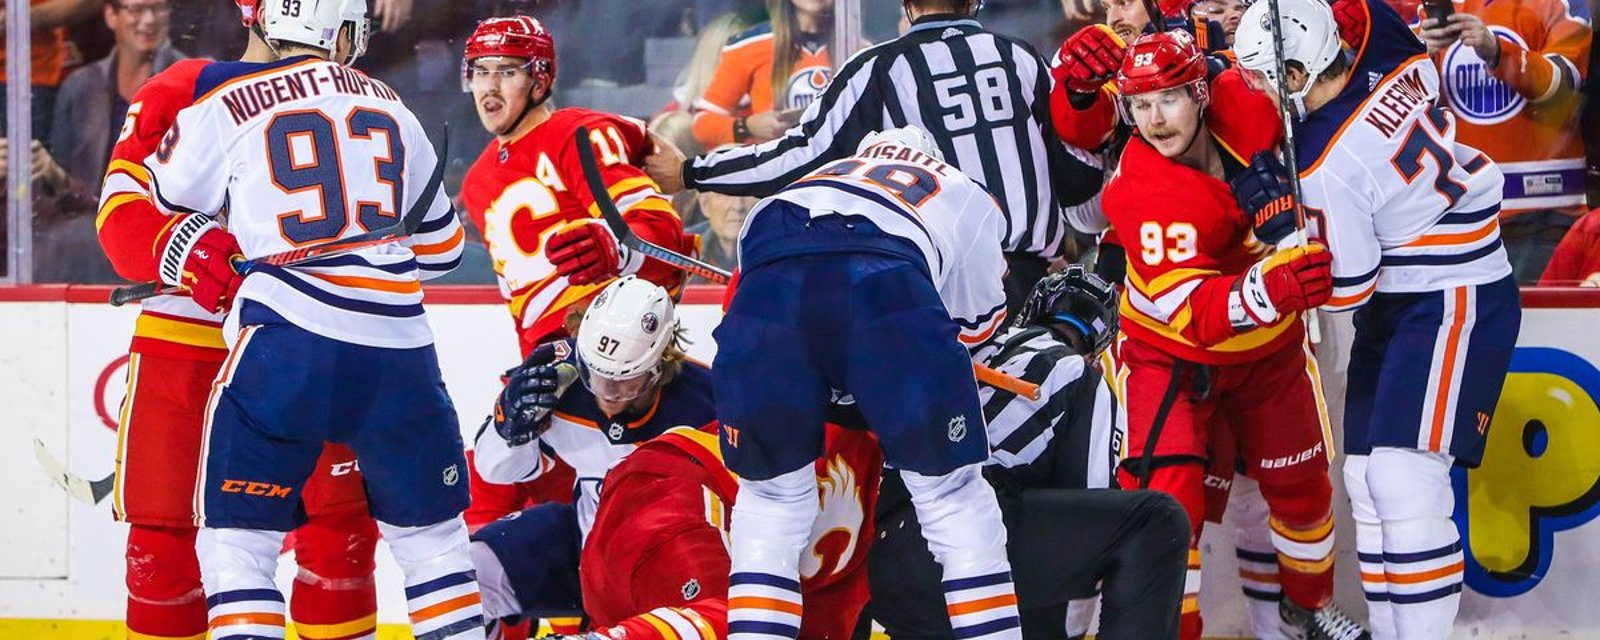 Oilers dare to go after Flames’ young forward!